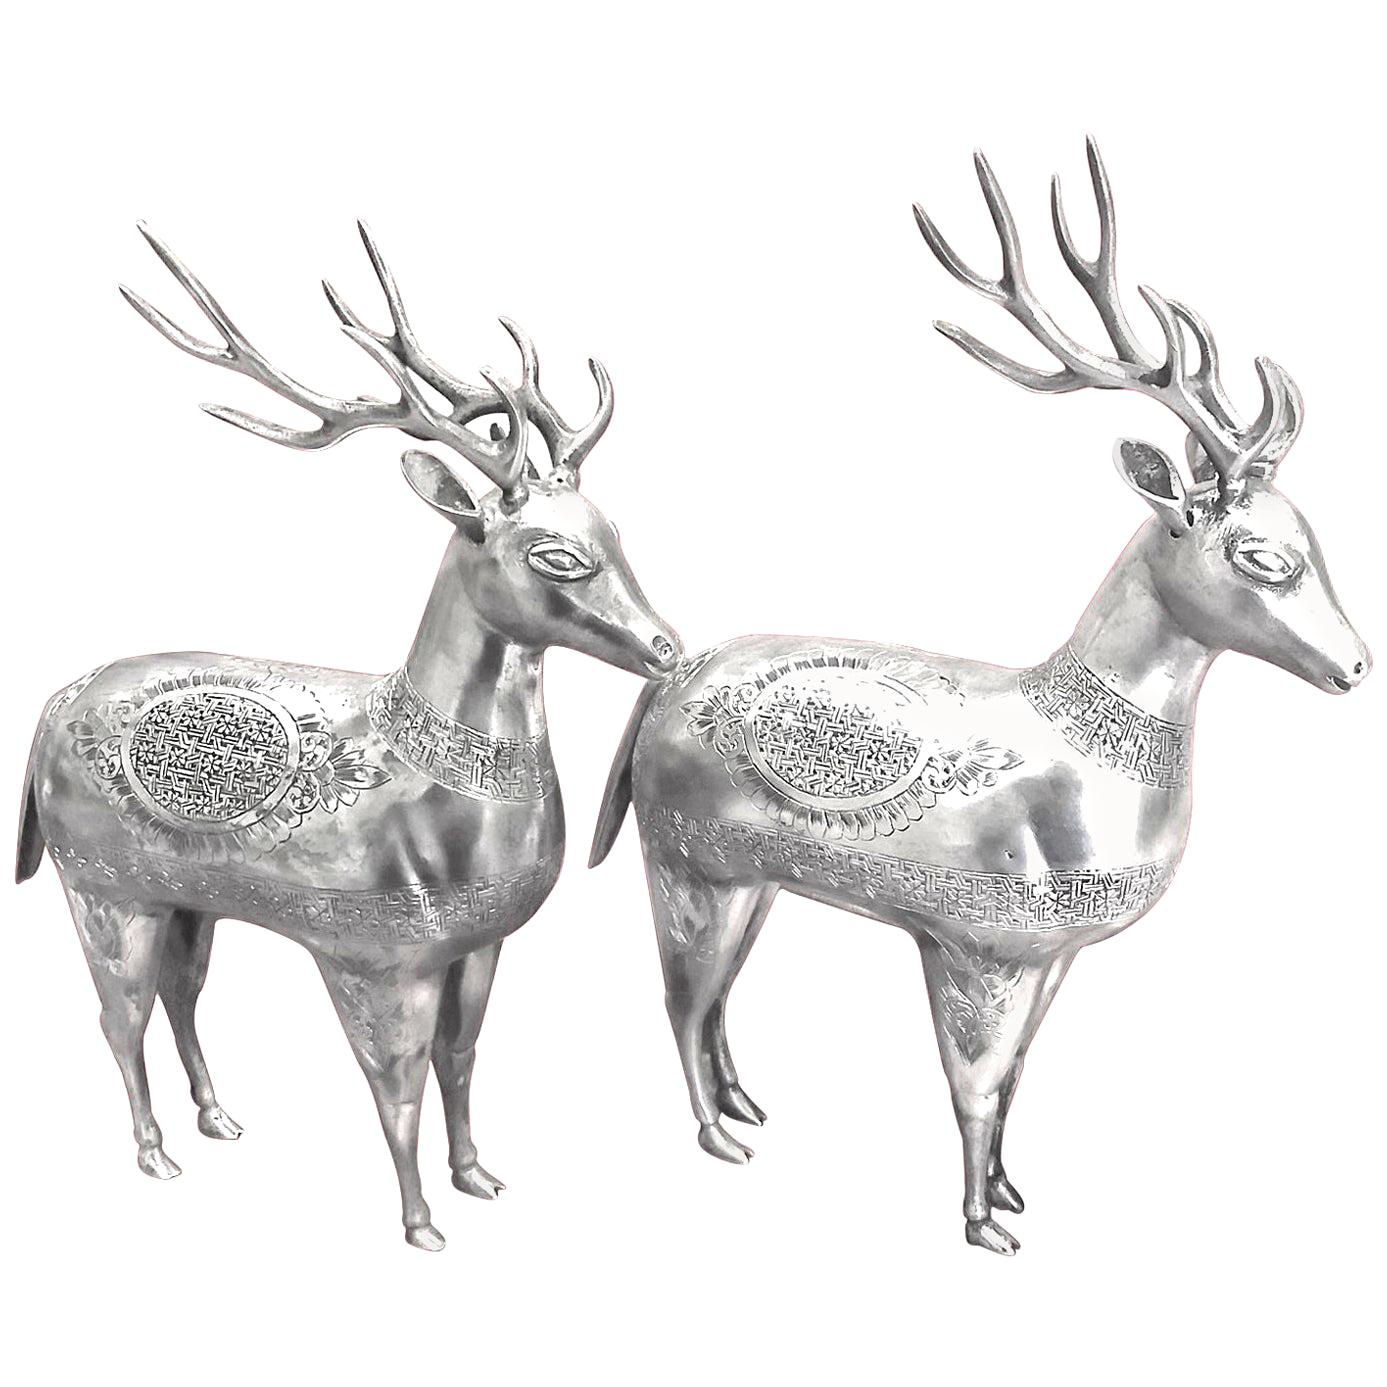 Antique, Gorgeous, Rare Pair of Deer Figurines in Silver, Handmade, Persian For Sale